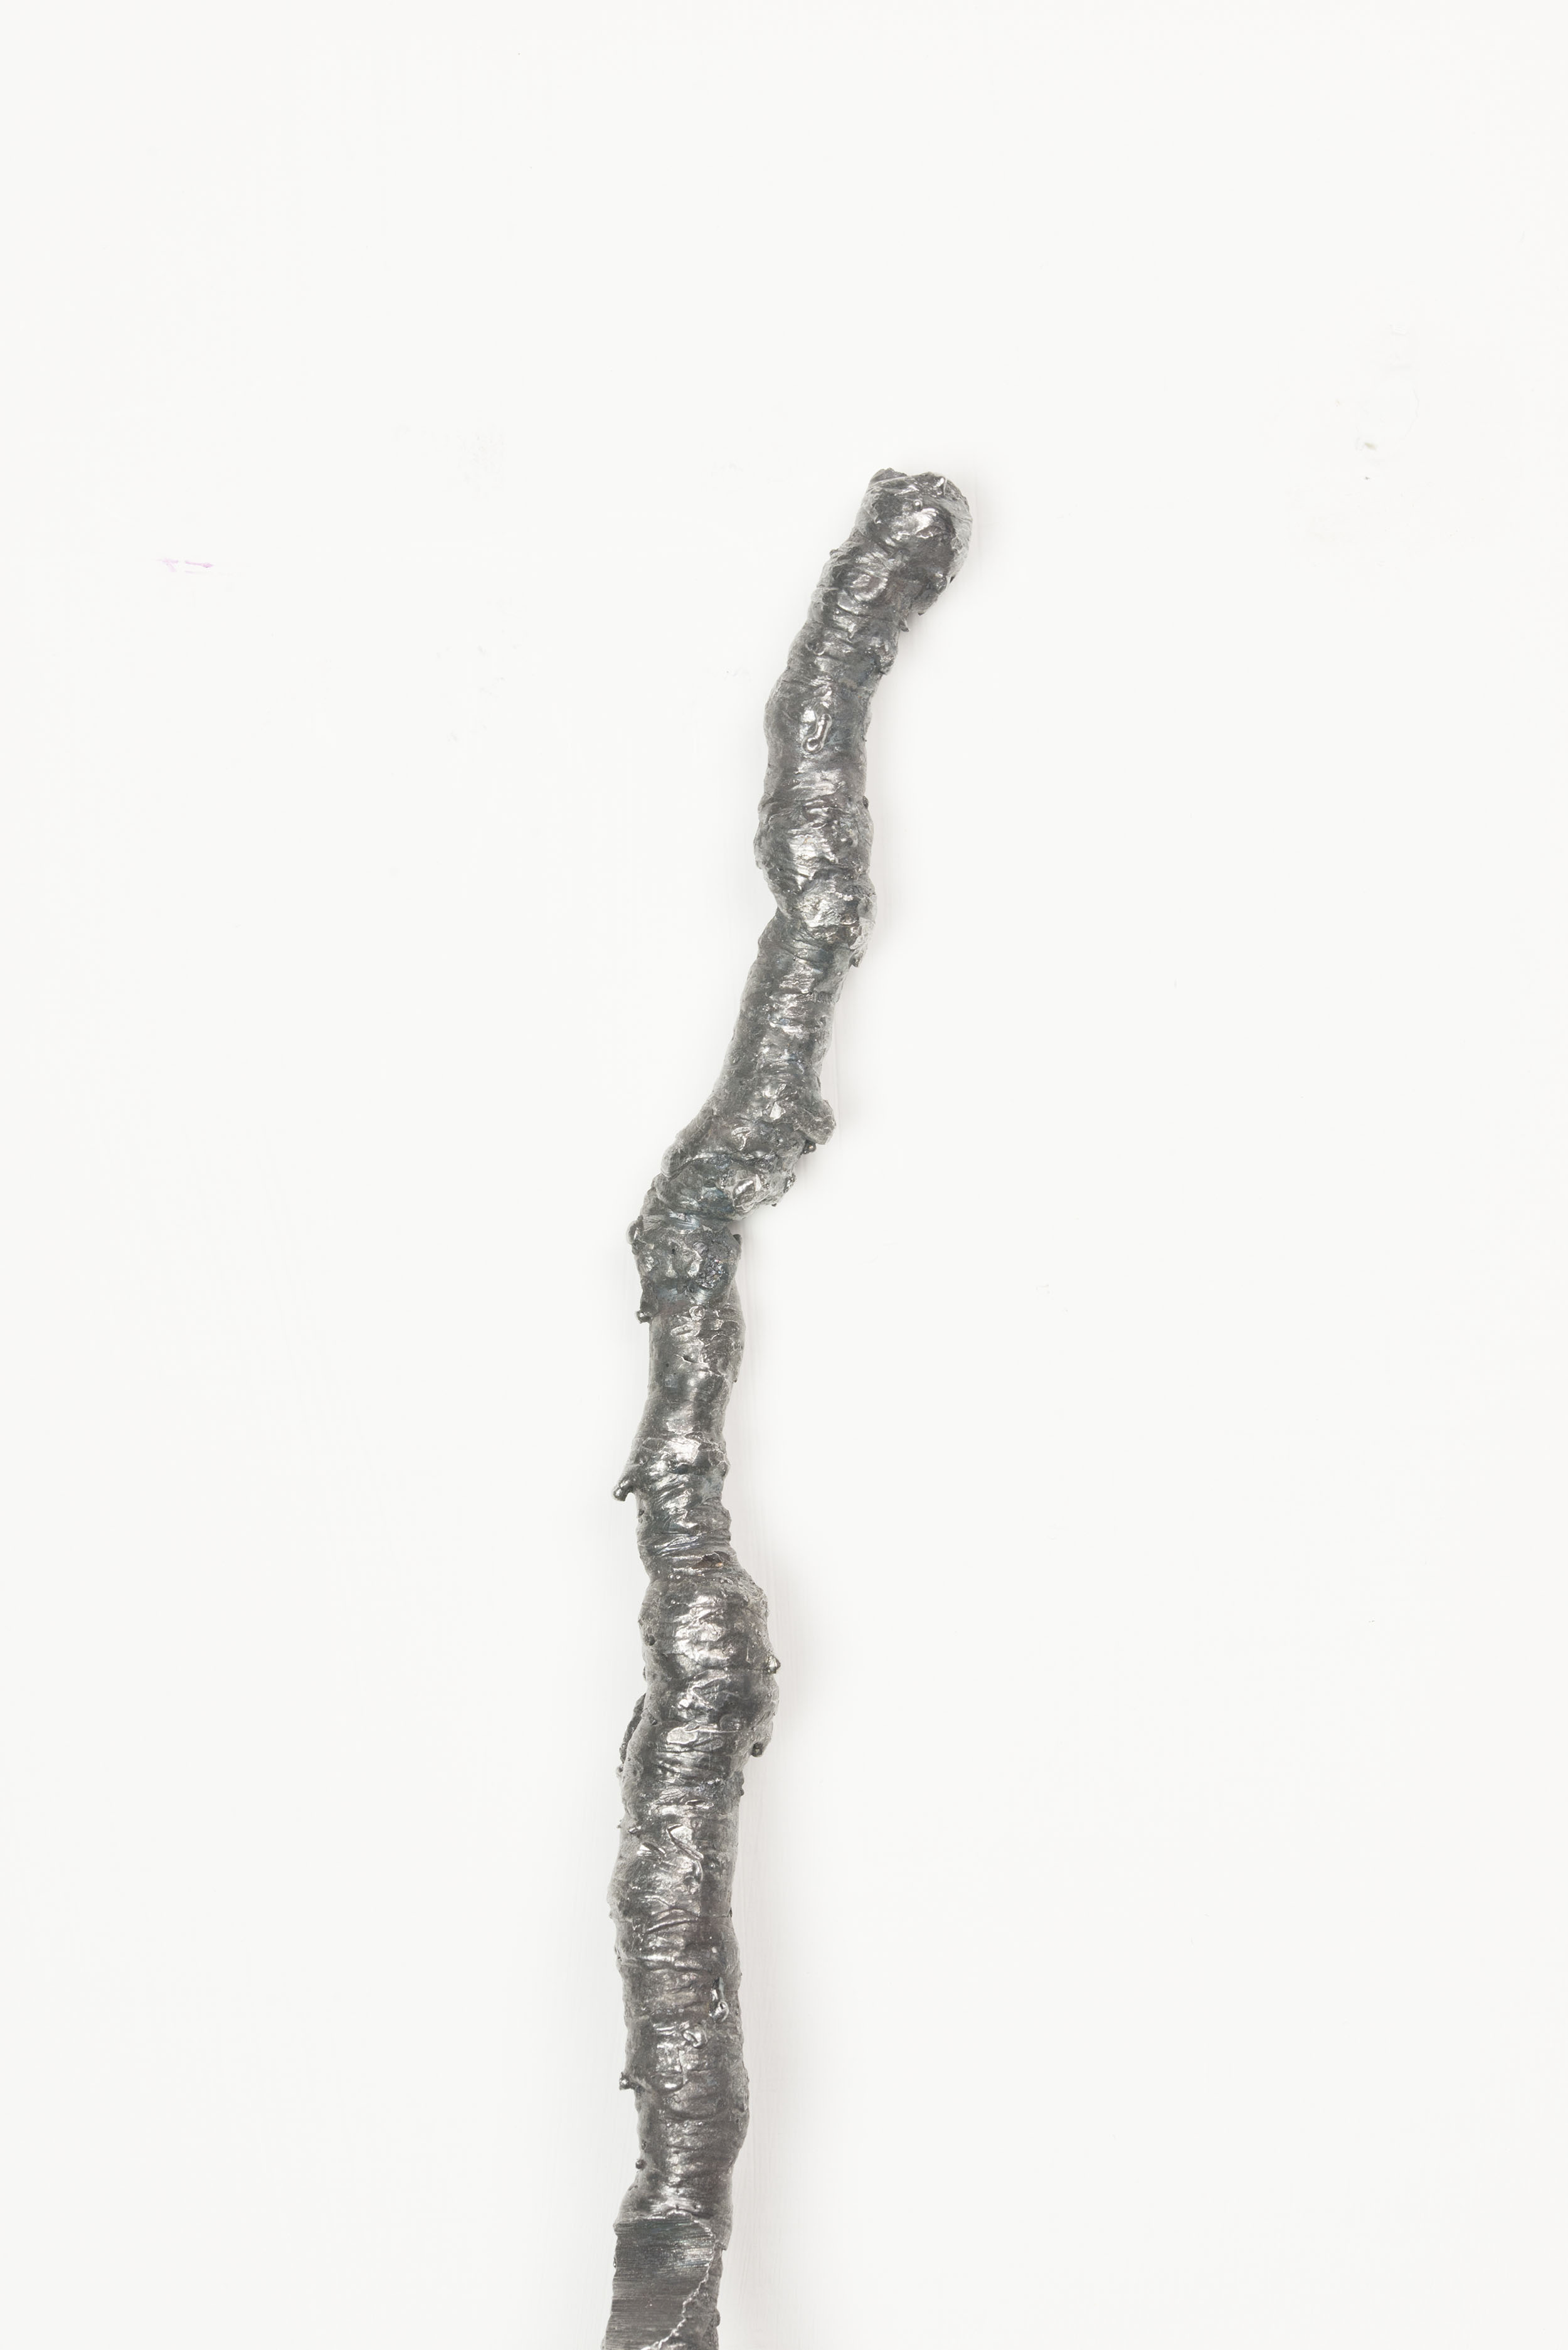 Dealing with length. Stainless steel weld metal. 365 x 15 x 10cm. 2015